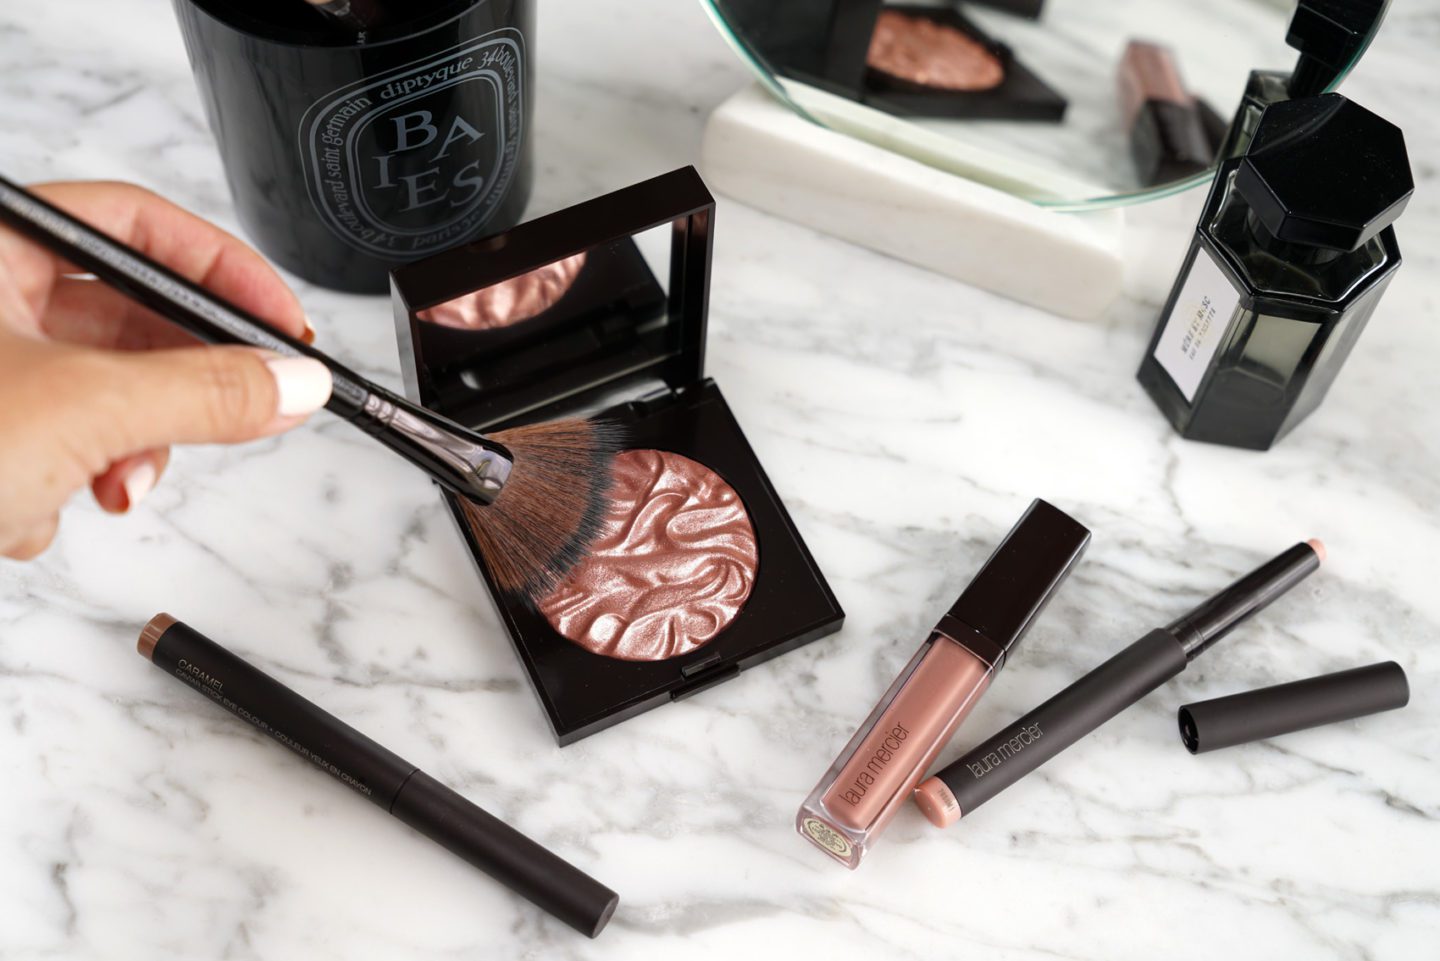 Laura Mercier Face Illuminator Inspiration Review and Swatches